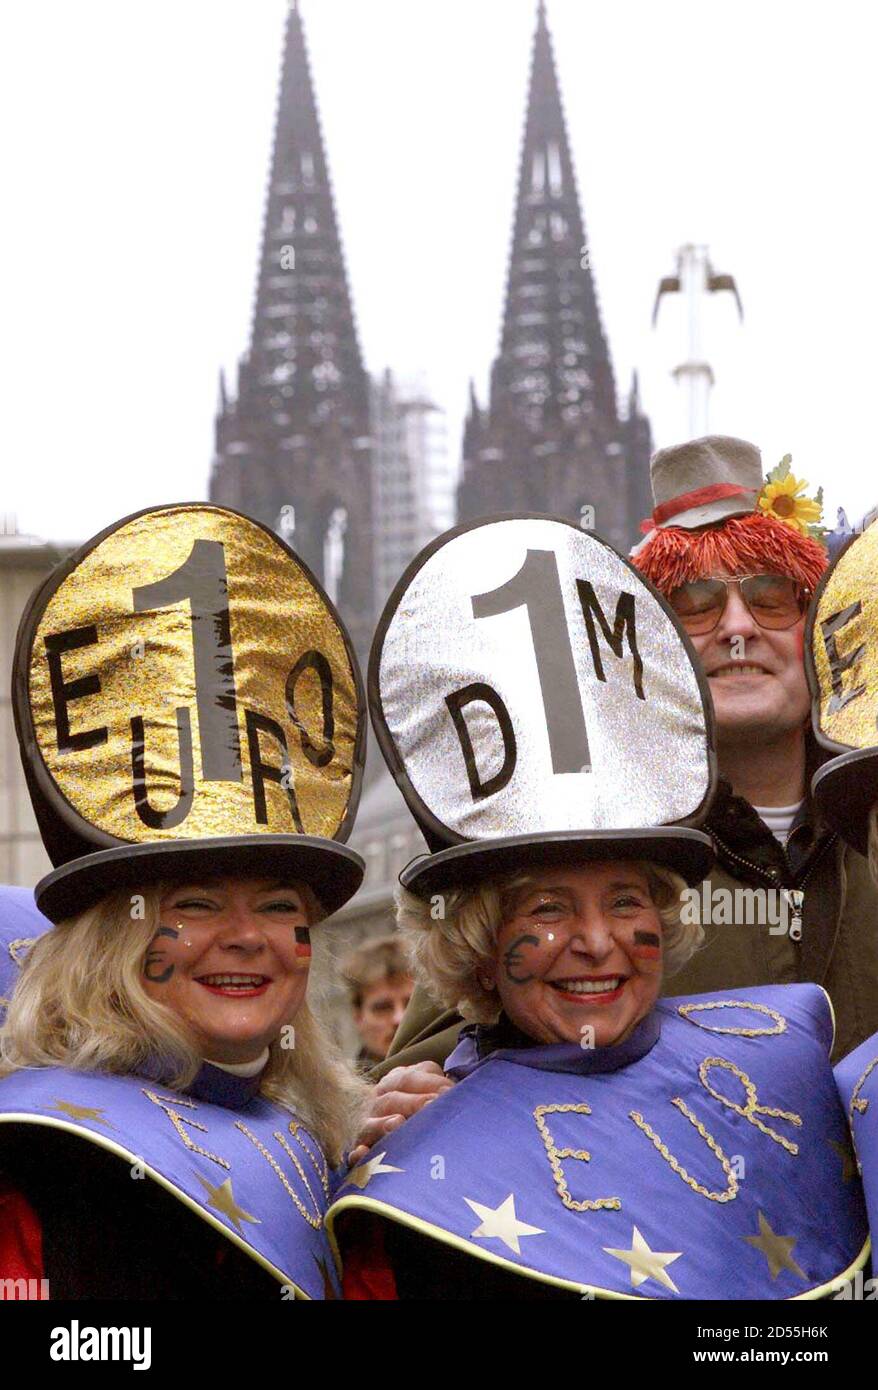 Carnival Goers Dress As Euro And Deutschmark Coins During The Traditional Rosemonday Carnival Parade In Cologne February 15 The Rosemonday Parades In Cologne Mainz And Duesseldorf Are The Highlight Of The German